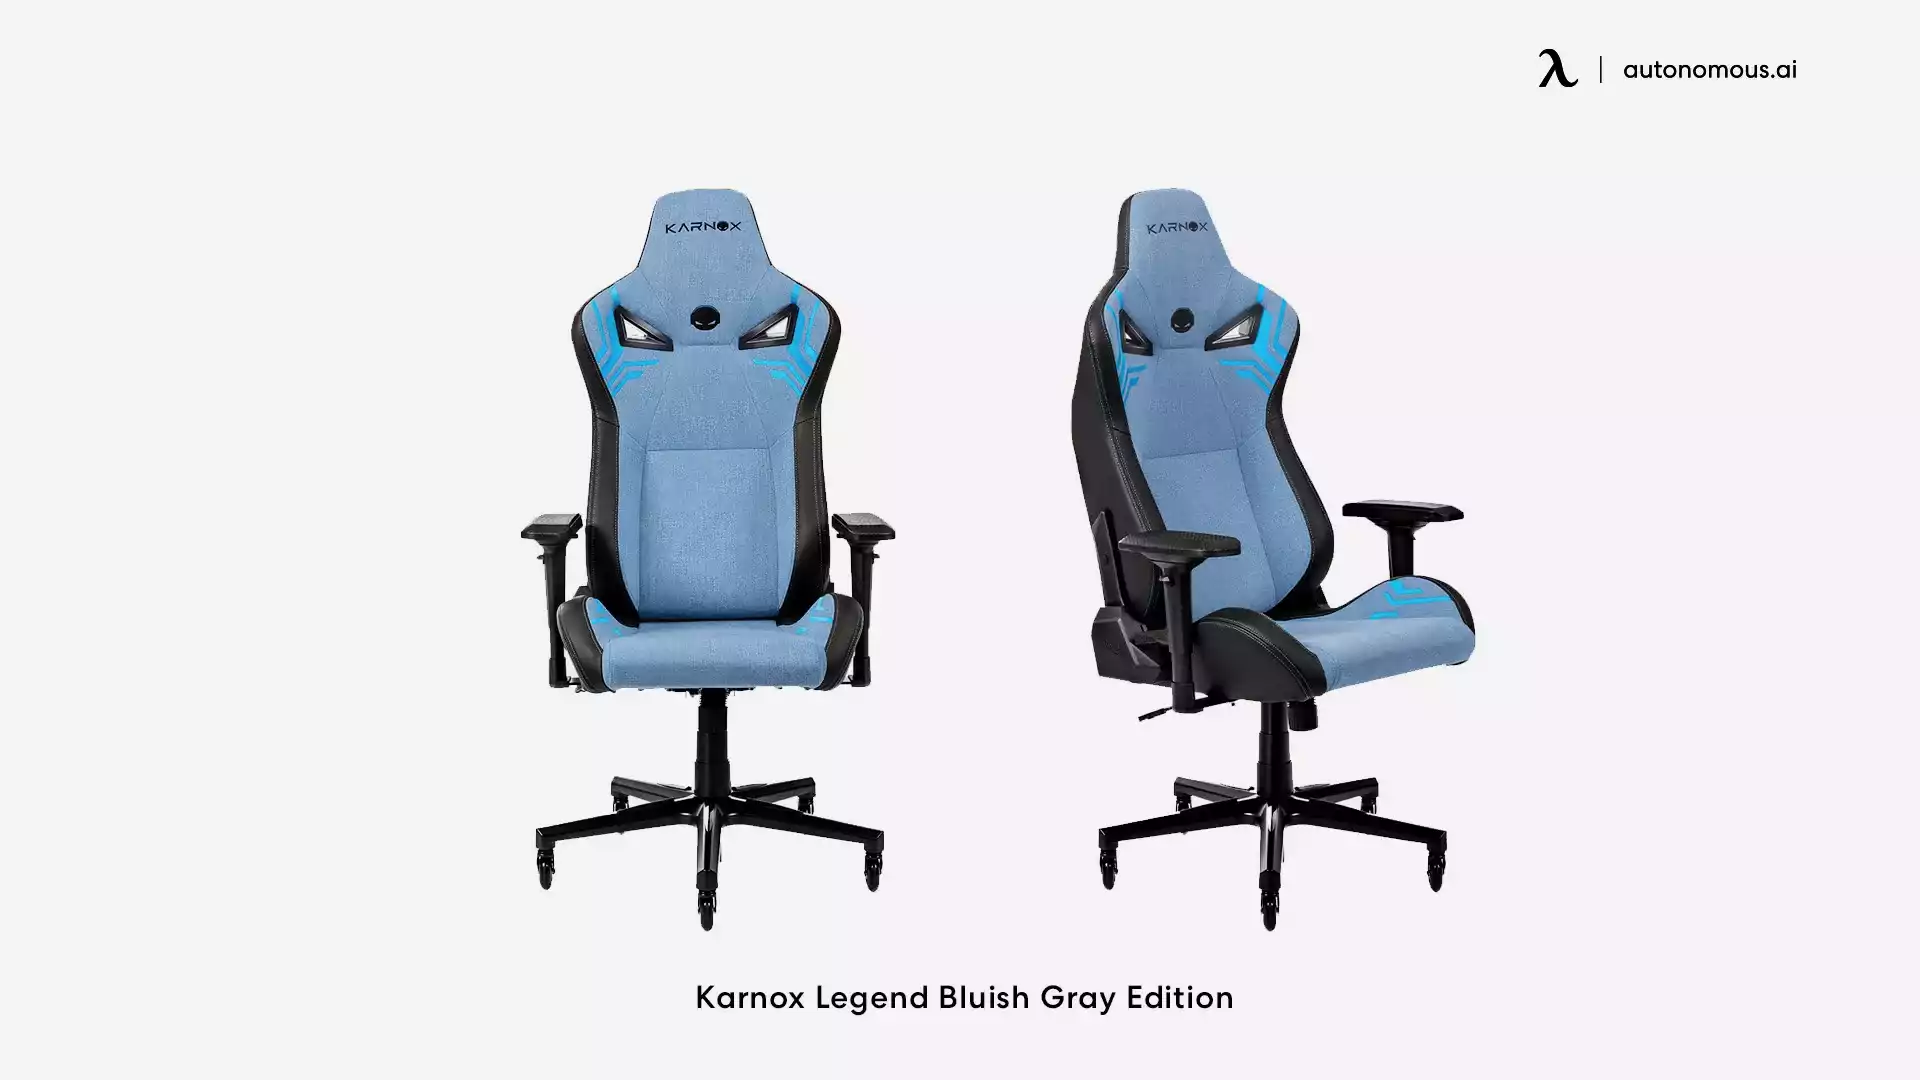 Karnox Legend Bluish Gray Edition office chairs for heavy people